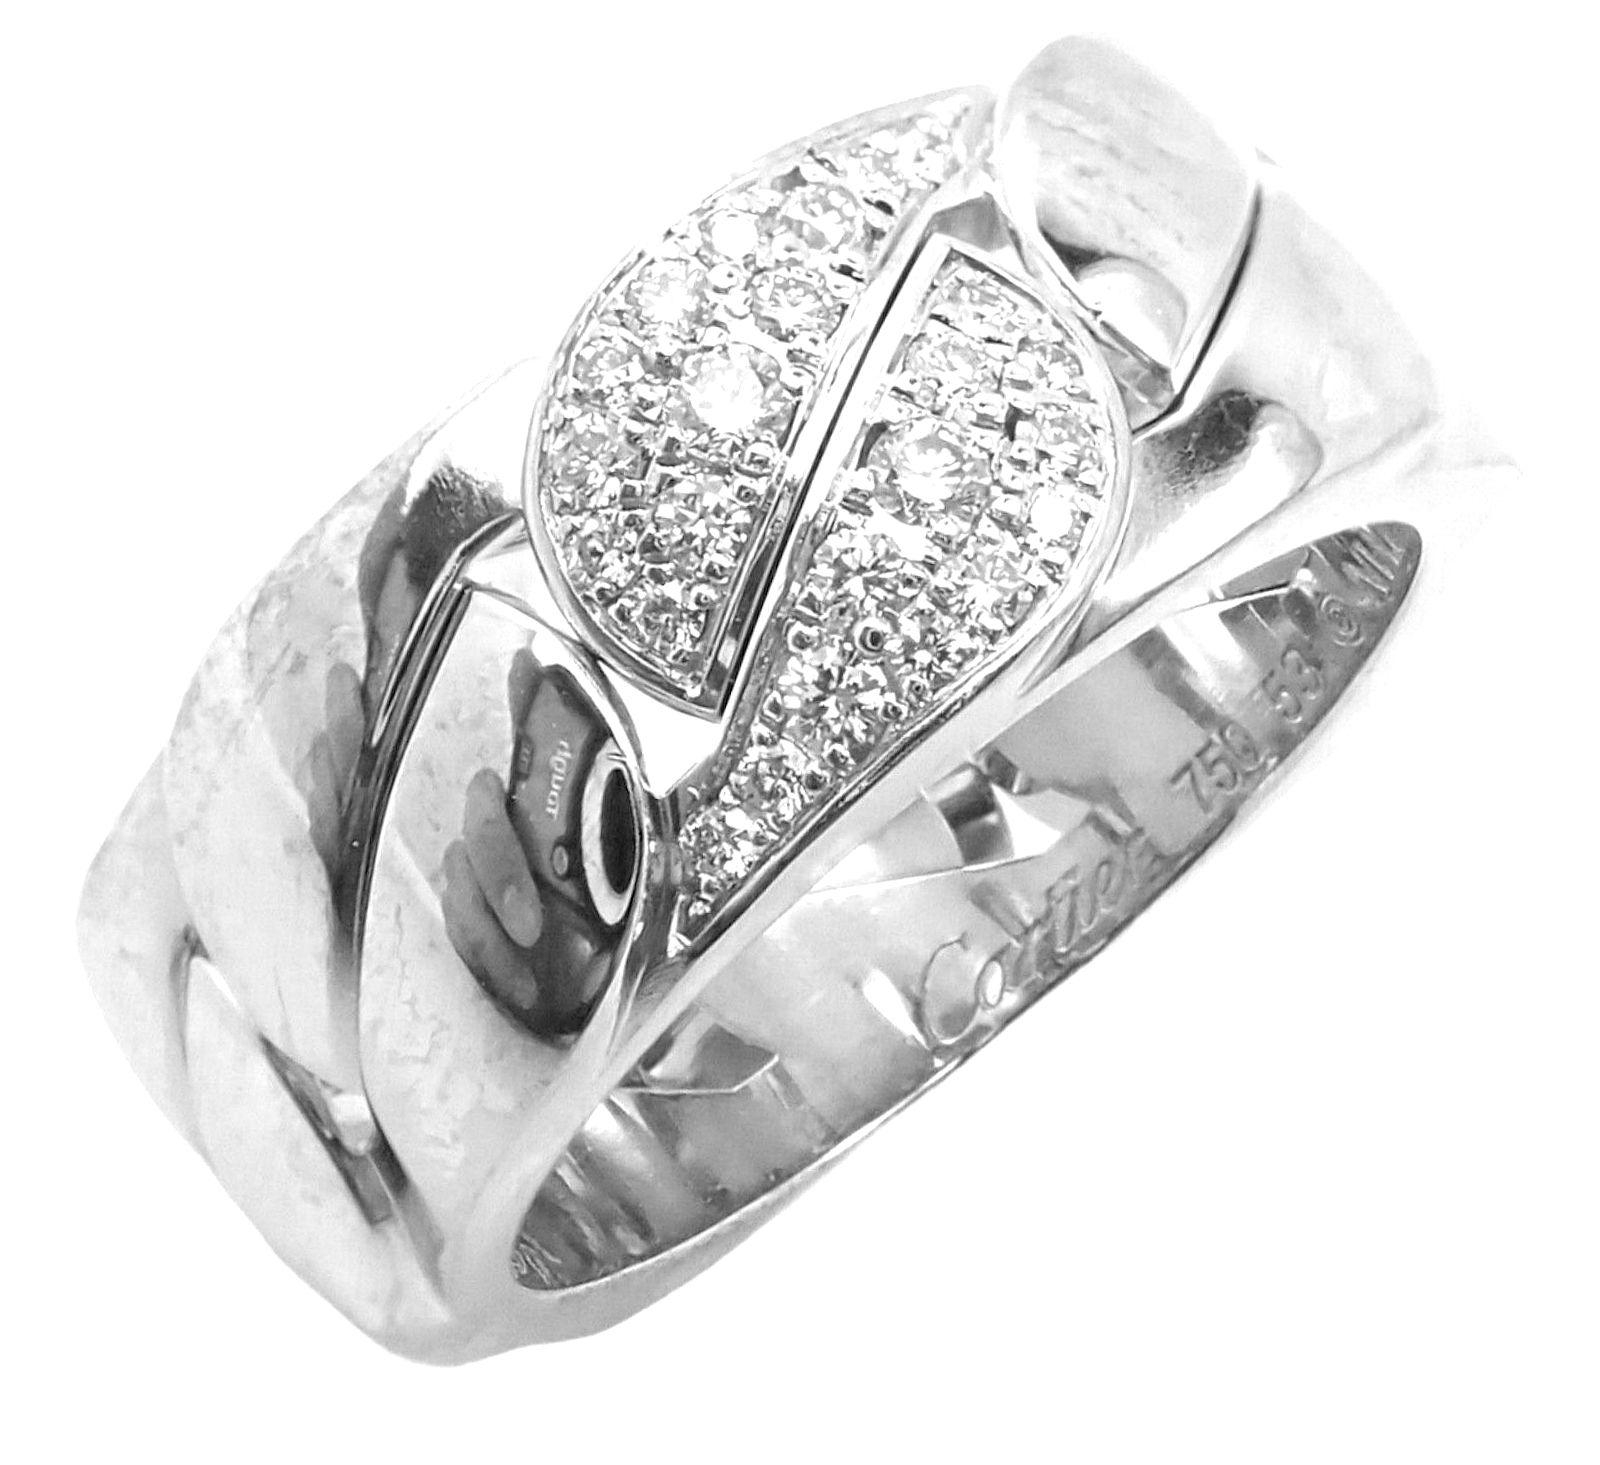 18k White Gold Diamond La Dona Band Ring by Cartier.  
With 22x round brilliant cut diamonds VS1 clarity, G color total weight approx. .50ct
Details: 
Ring Size: European 53, US 6 1/4
Width: 9mm
Weight: 15.7 grams
Stamped Hallmarks Cartier 750 53